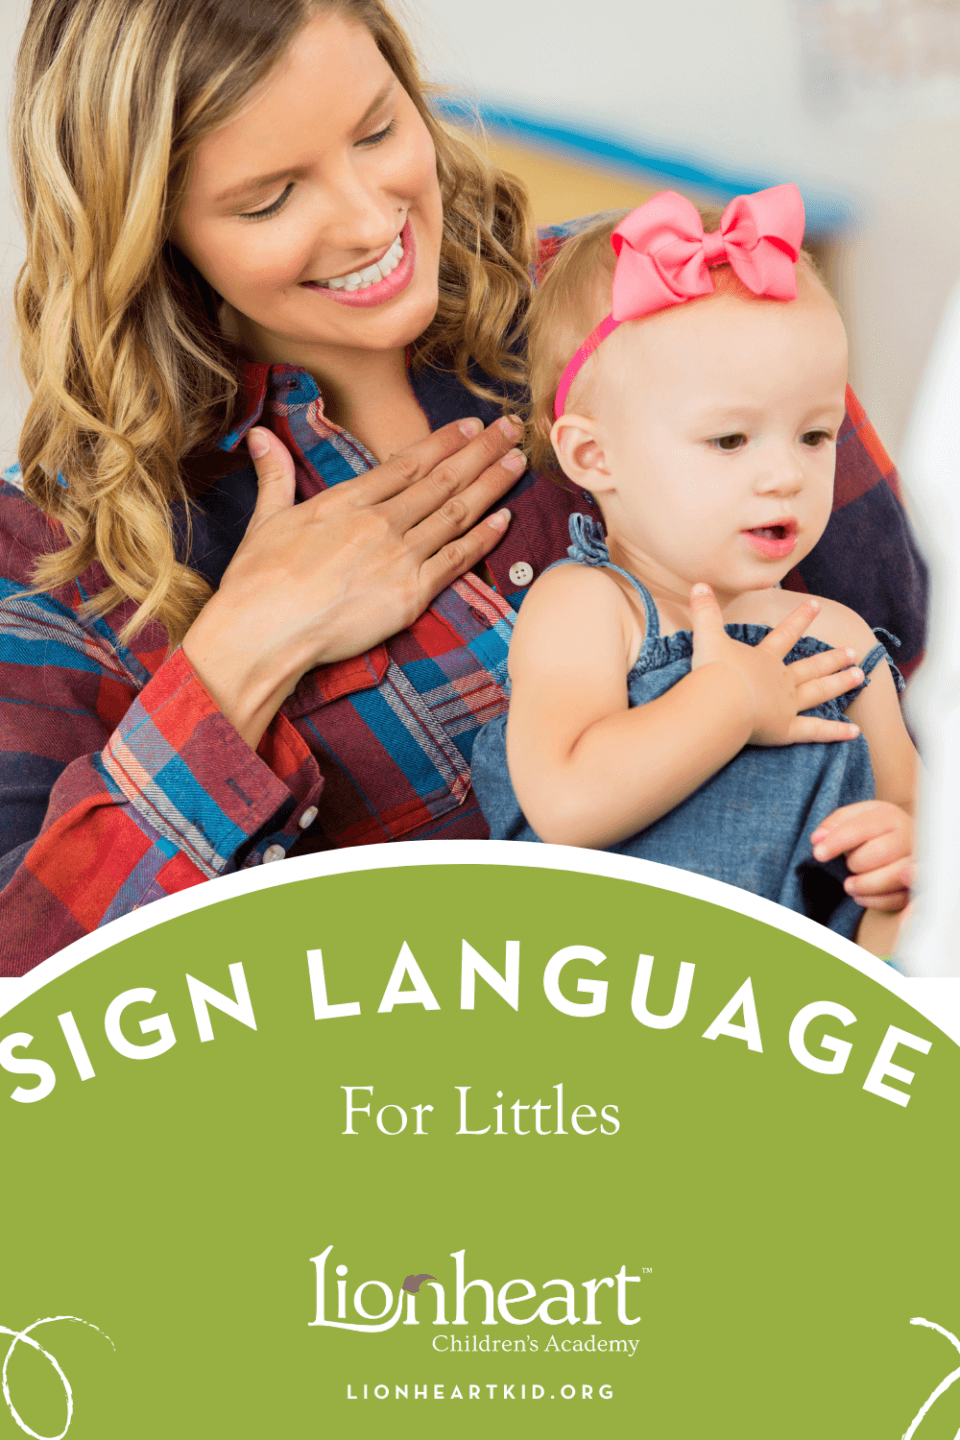 Mom and baby doing sign language